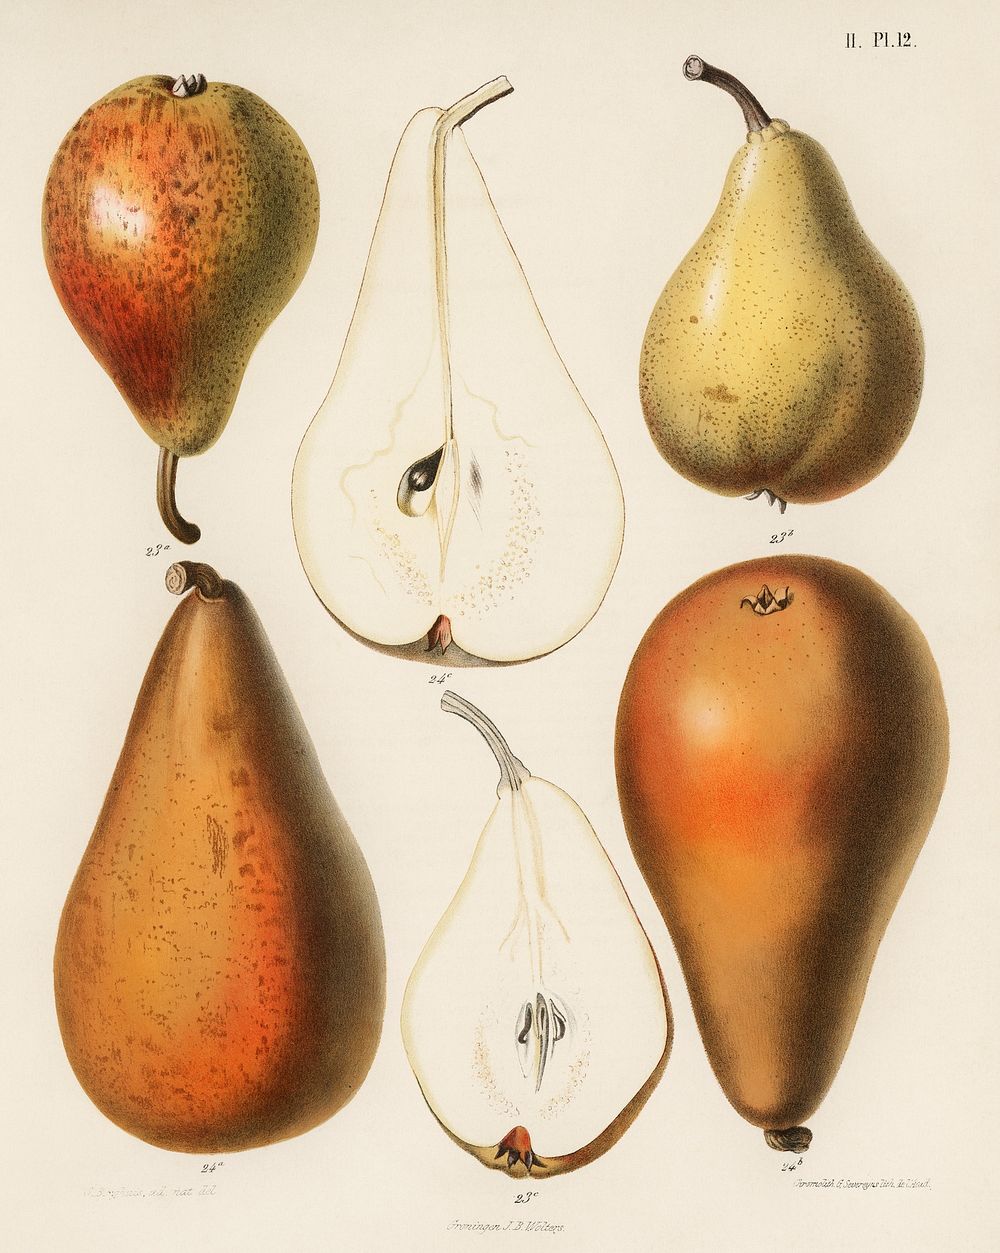 A vintage chromolithograph of fresh pears printed in 1887, by Samuel Berghuis. Digitally enhanced from our own original…